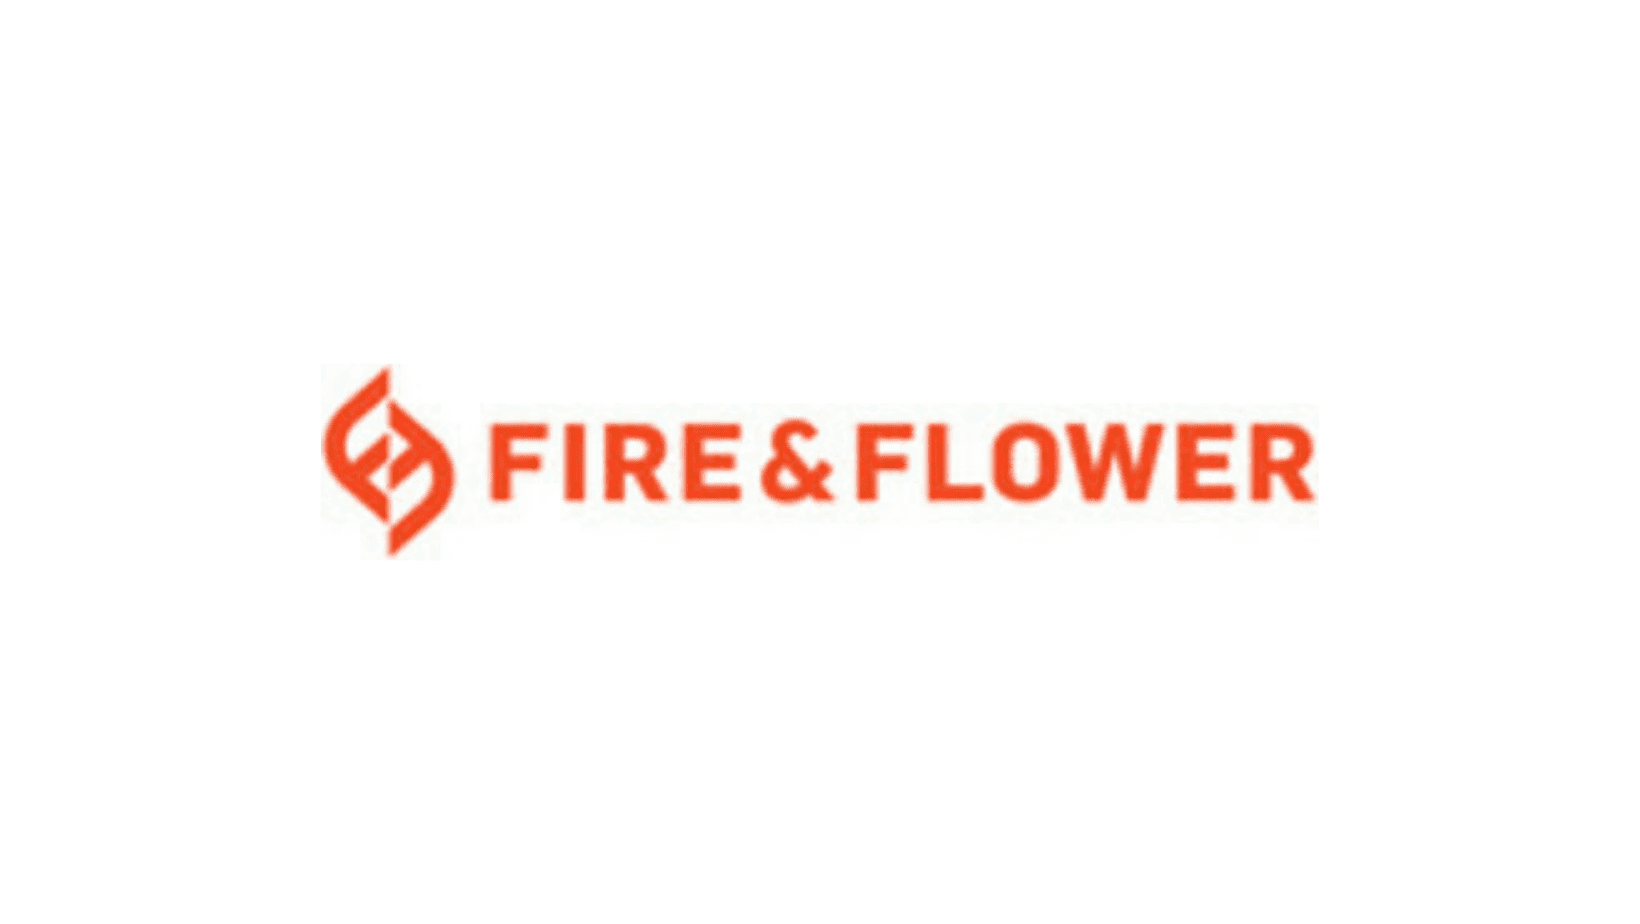 Fire and flower online dispensaries